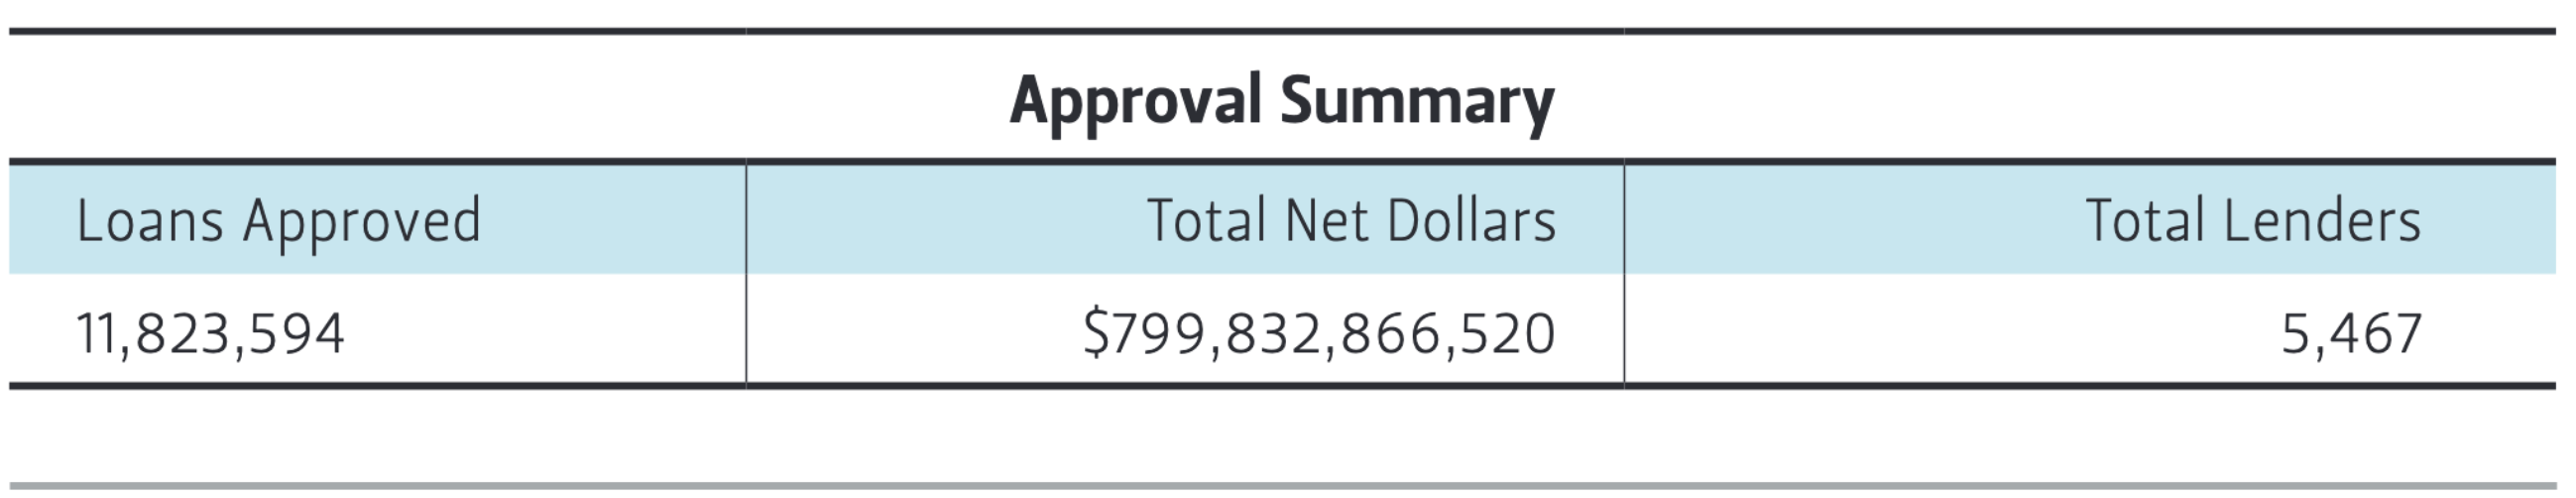 Figure 1 shows 11,823,594 loans approved, with a total of 5,467 lenders and $799,832,866,520 in total net dollars